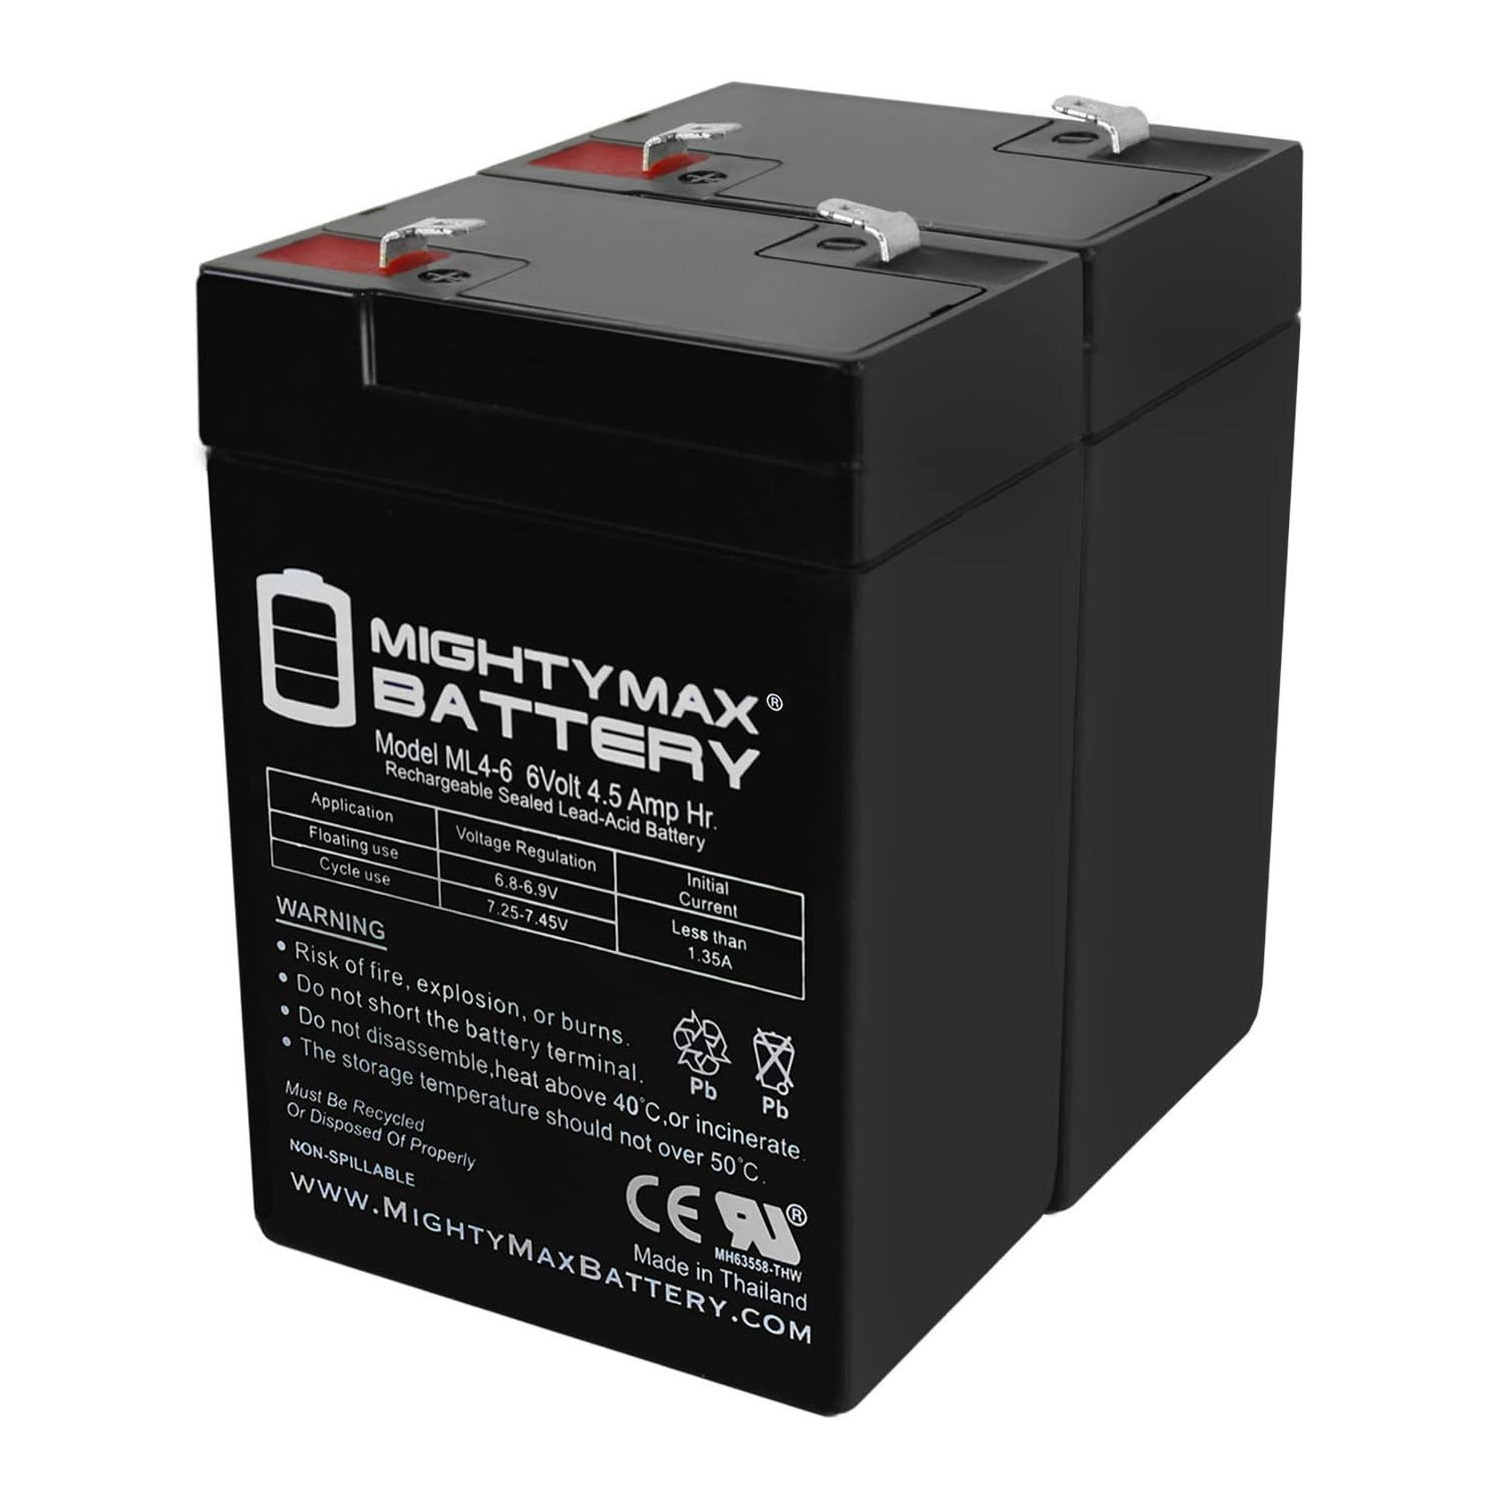 6V 4.5AH SLA Replacement Battery for APC RBK400 - 2 Pack